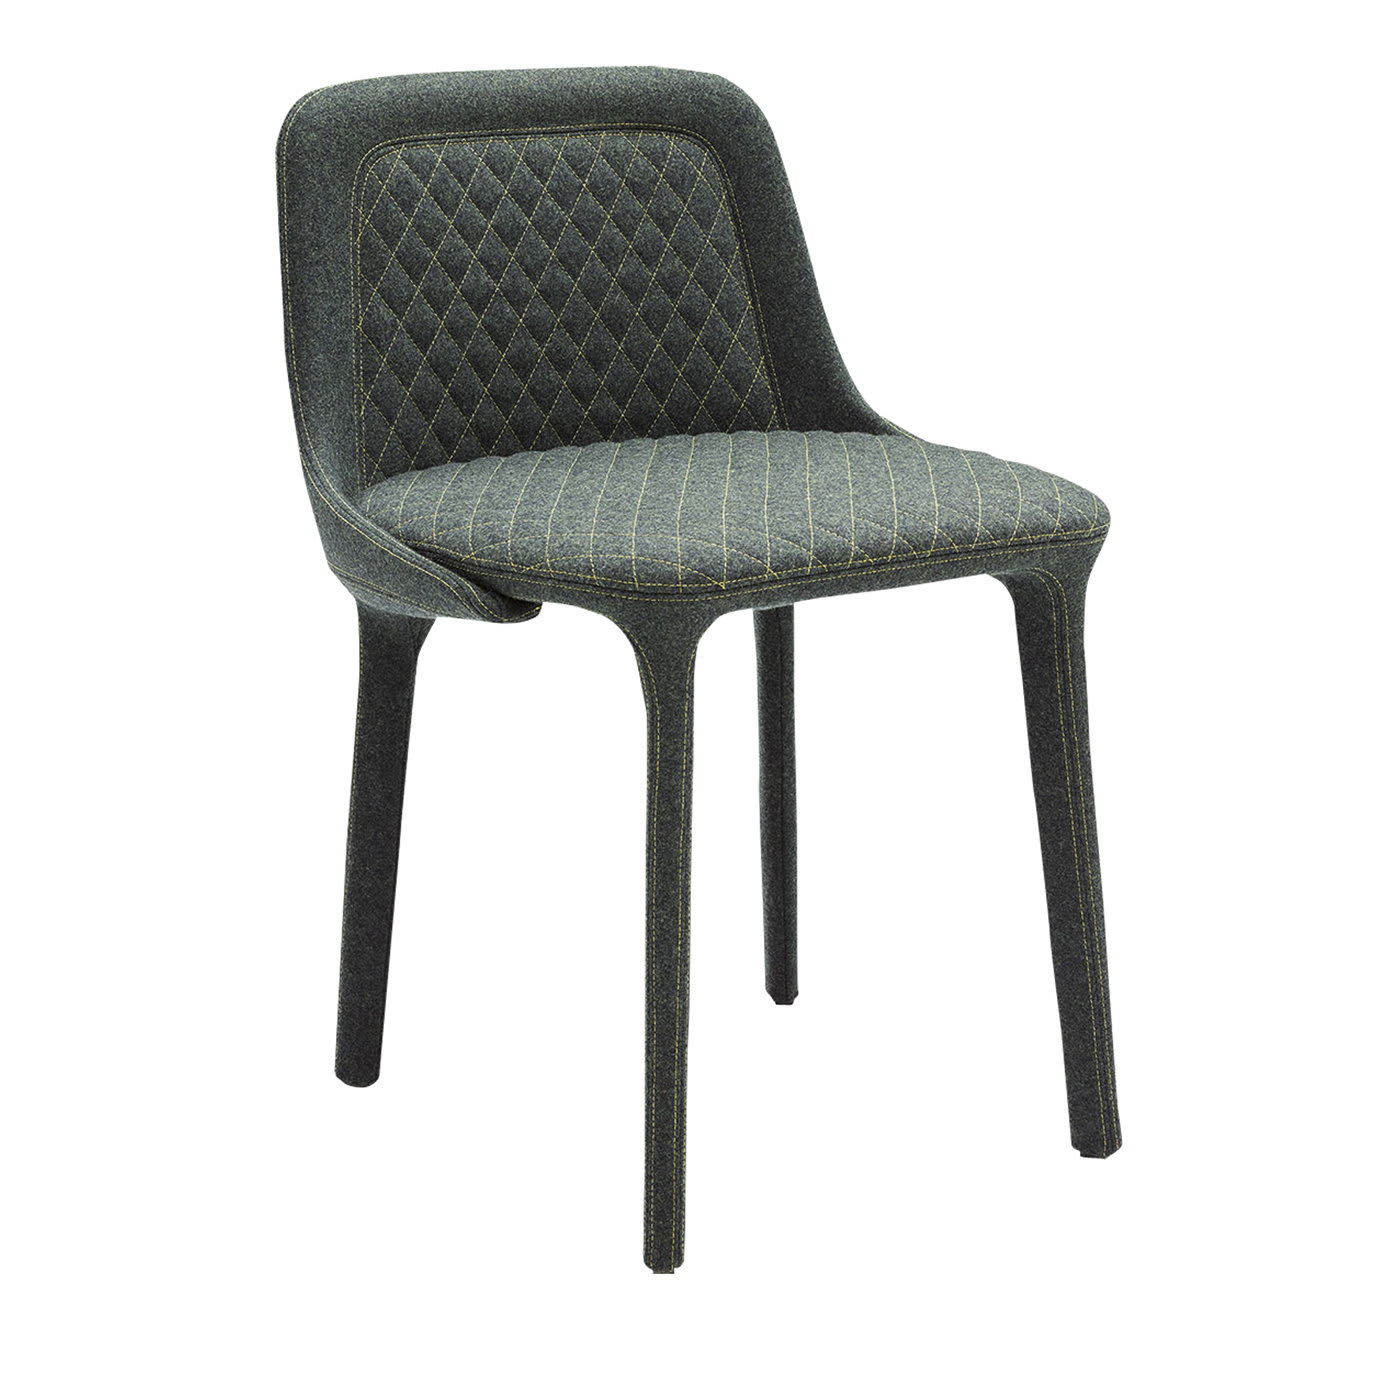 Lepel Green Quilted Chair by Luca Nichetto - Casamania